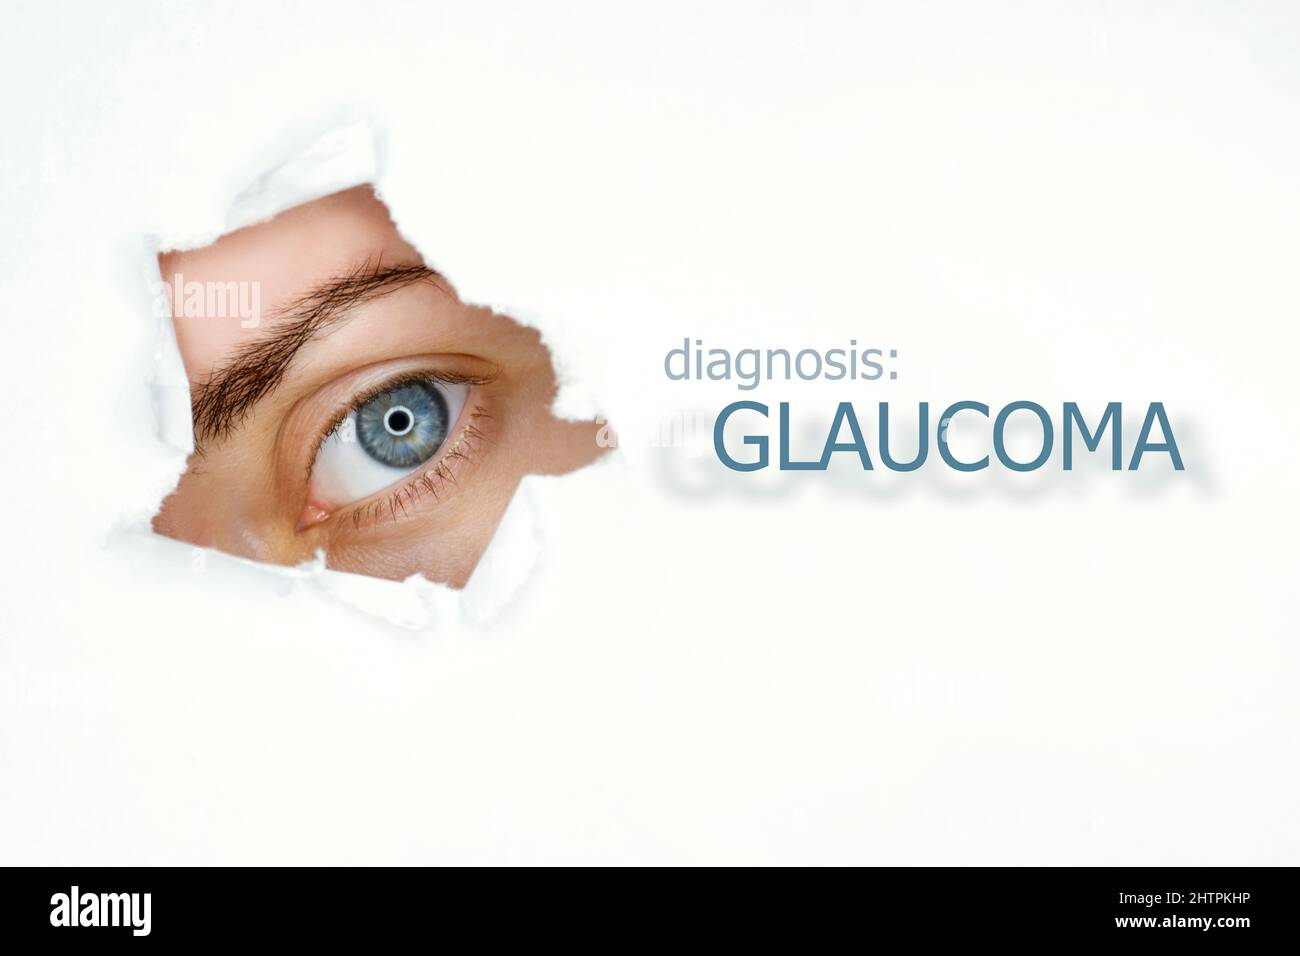 Glaucoma disease poster with  blue eye on left. Isolated on white Stock Photo